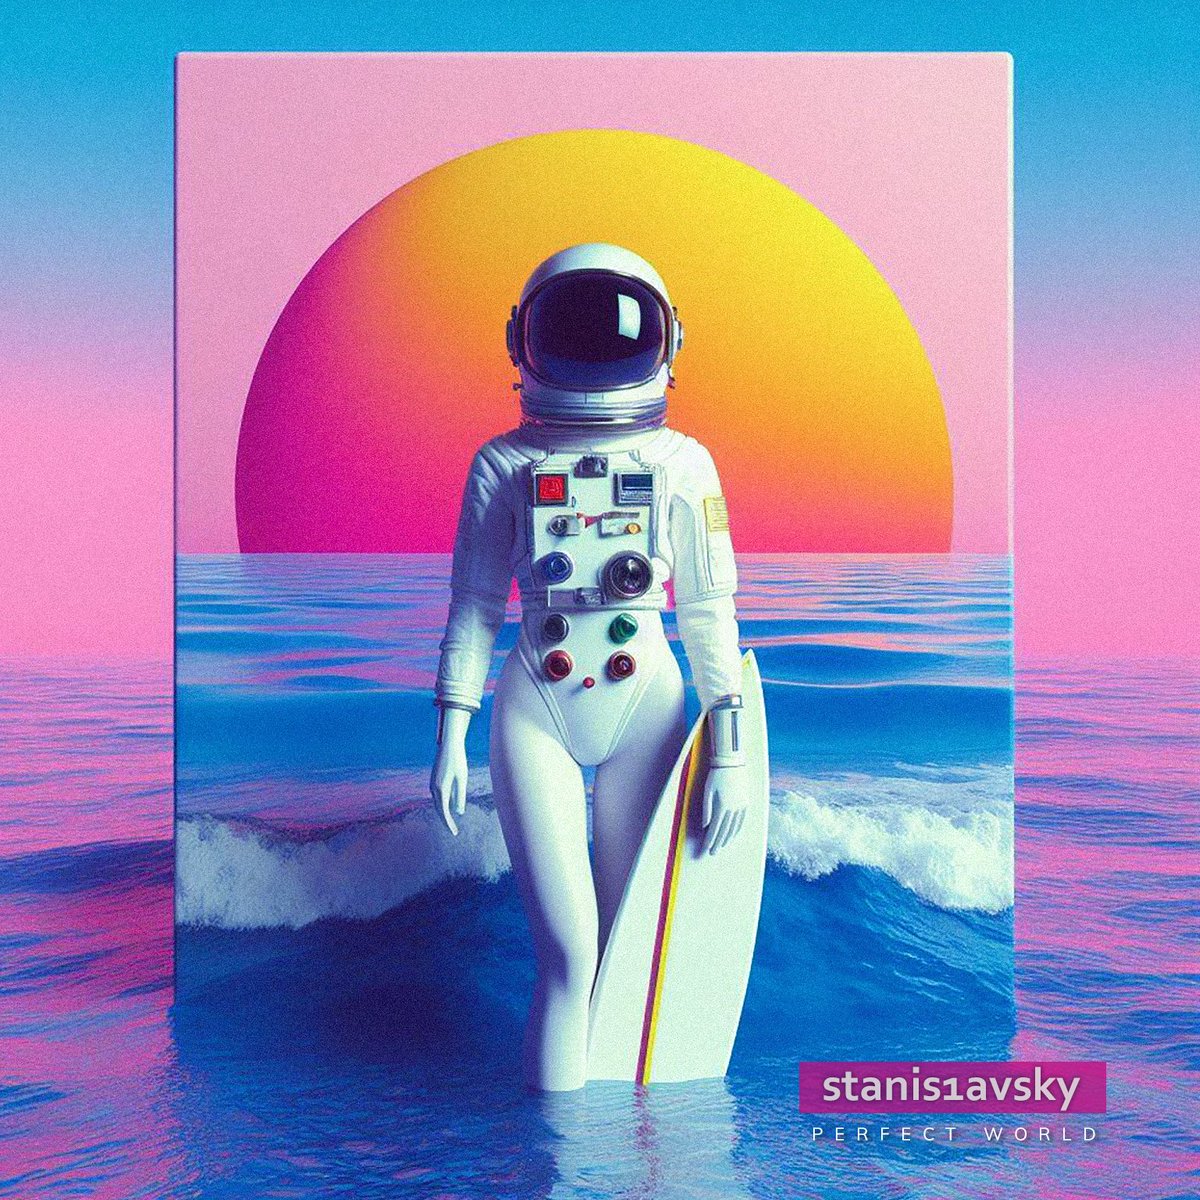 #stanis1avsky #newwave #synthpop #synthwave #artpop #neofuturism                                                       

Art is a myth of another life